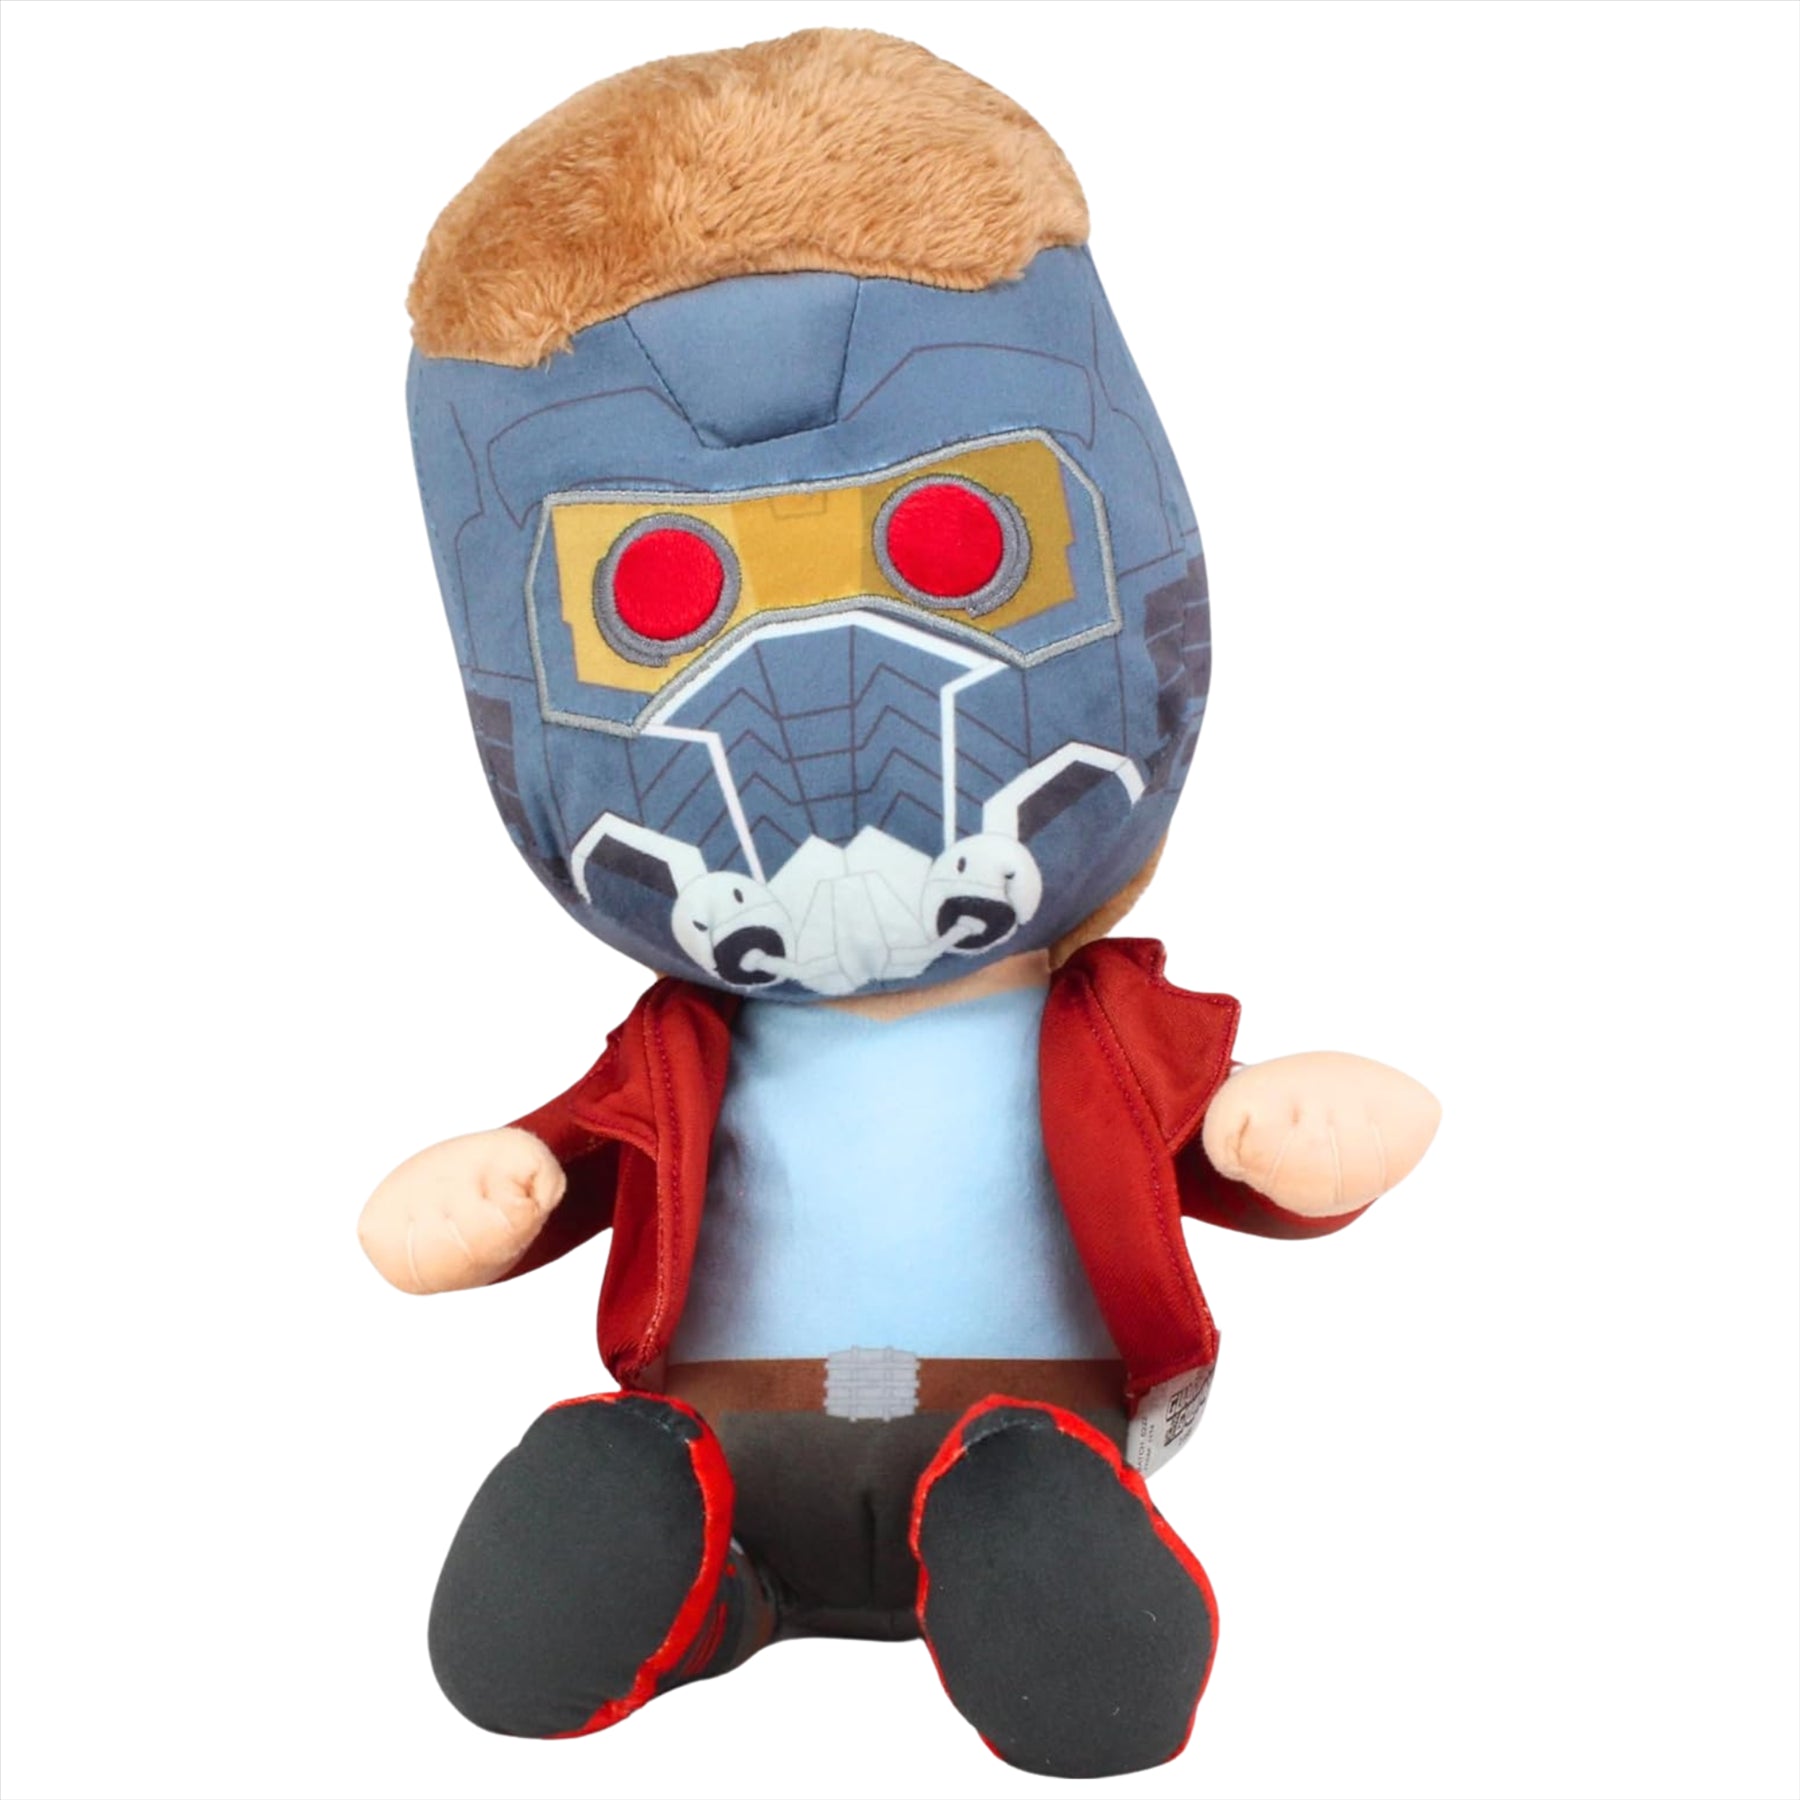 Guardians of the Galaxy Avengers Starlord Super Soft Embroidered 36cm Plush Toy